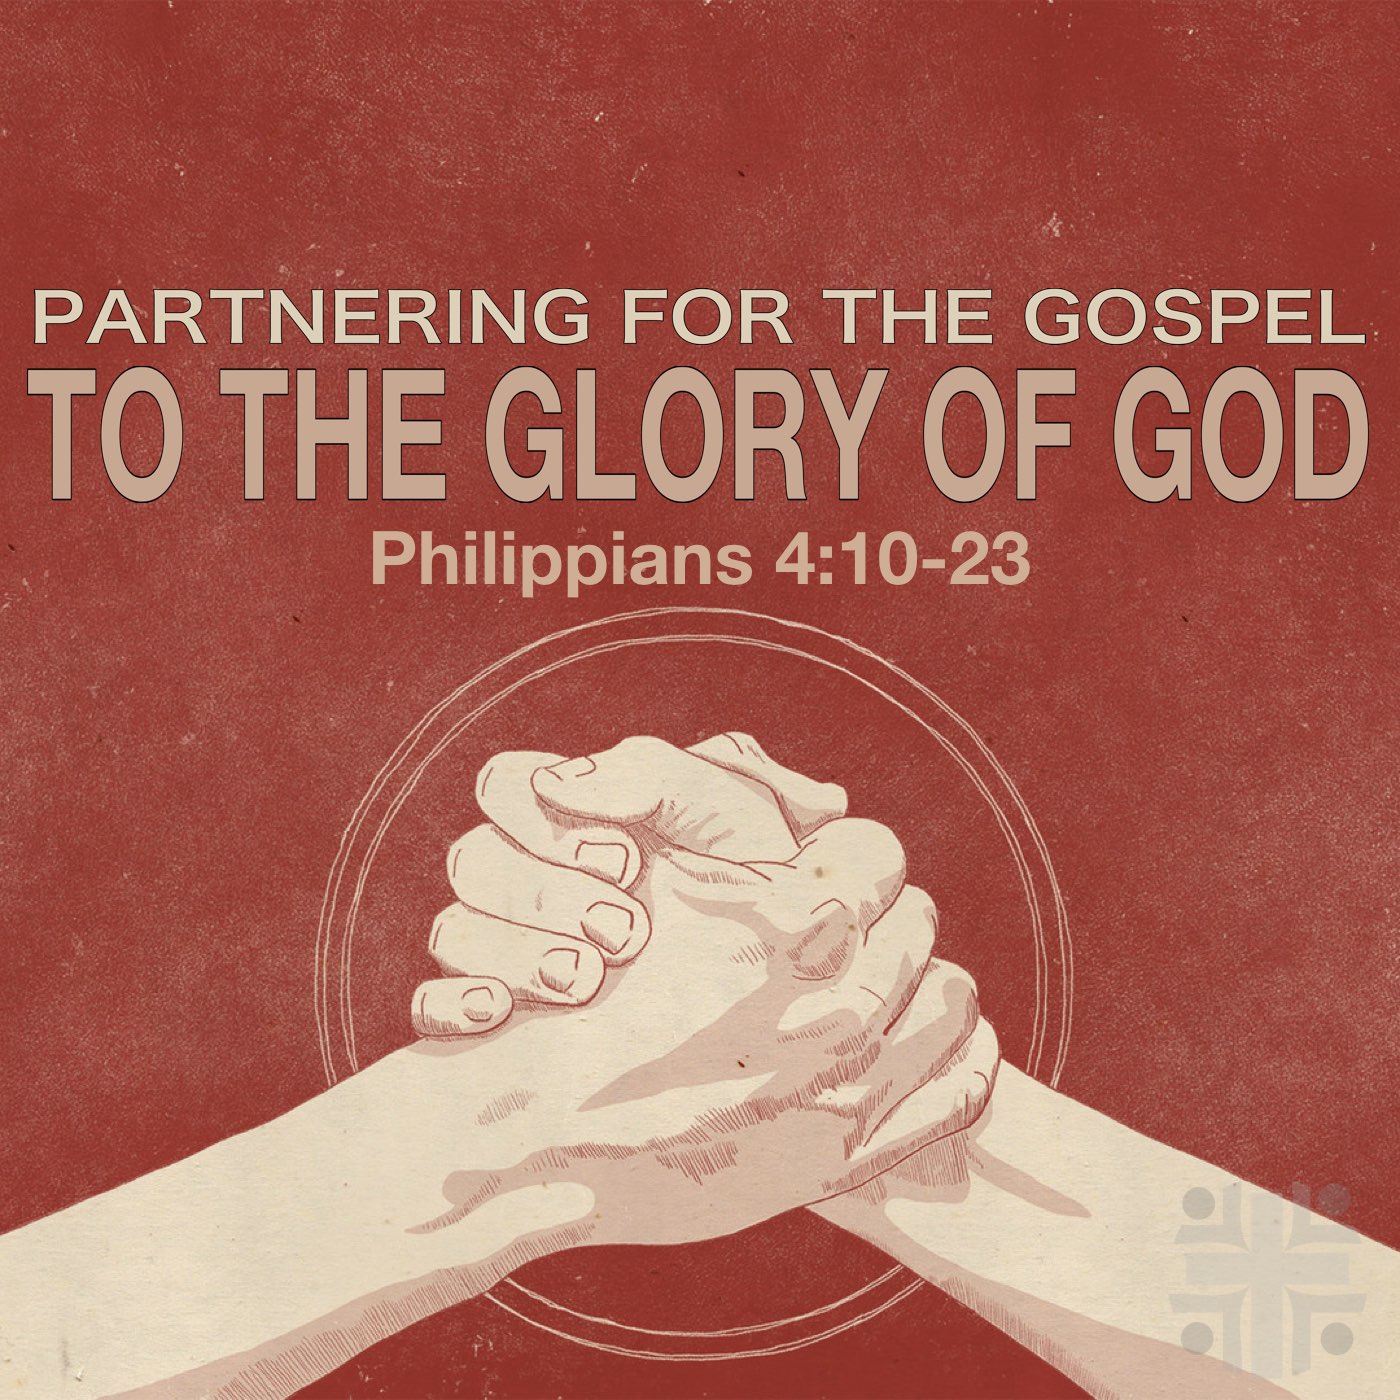 Partnering for the Gospel to the Glory of God